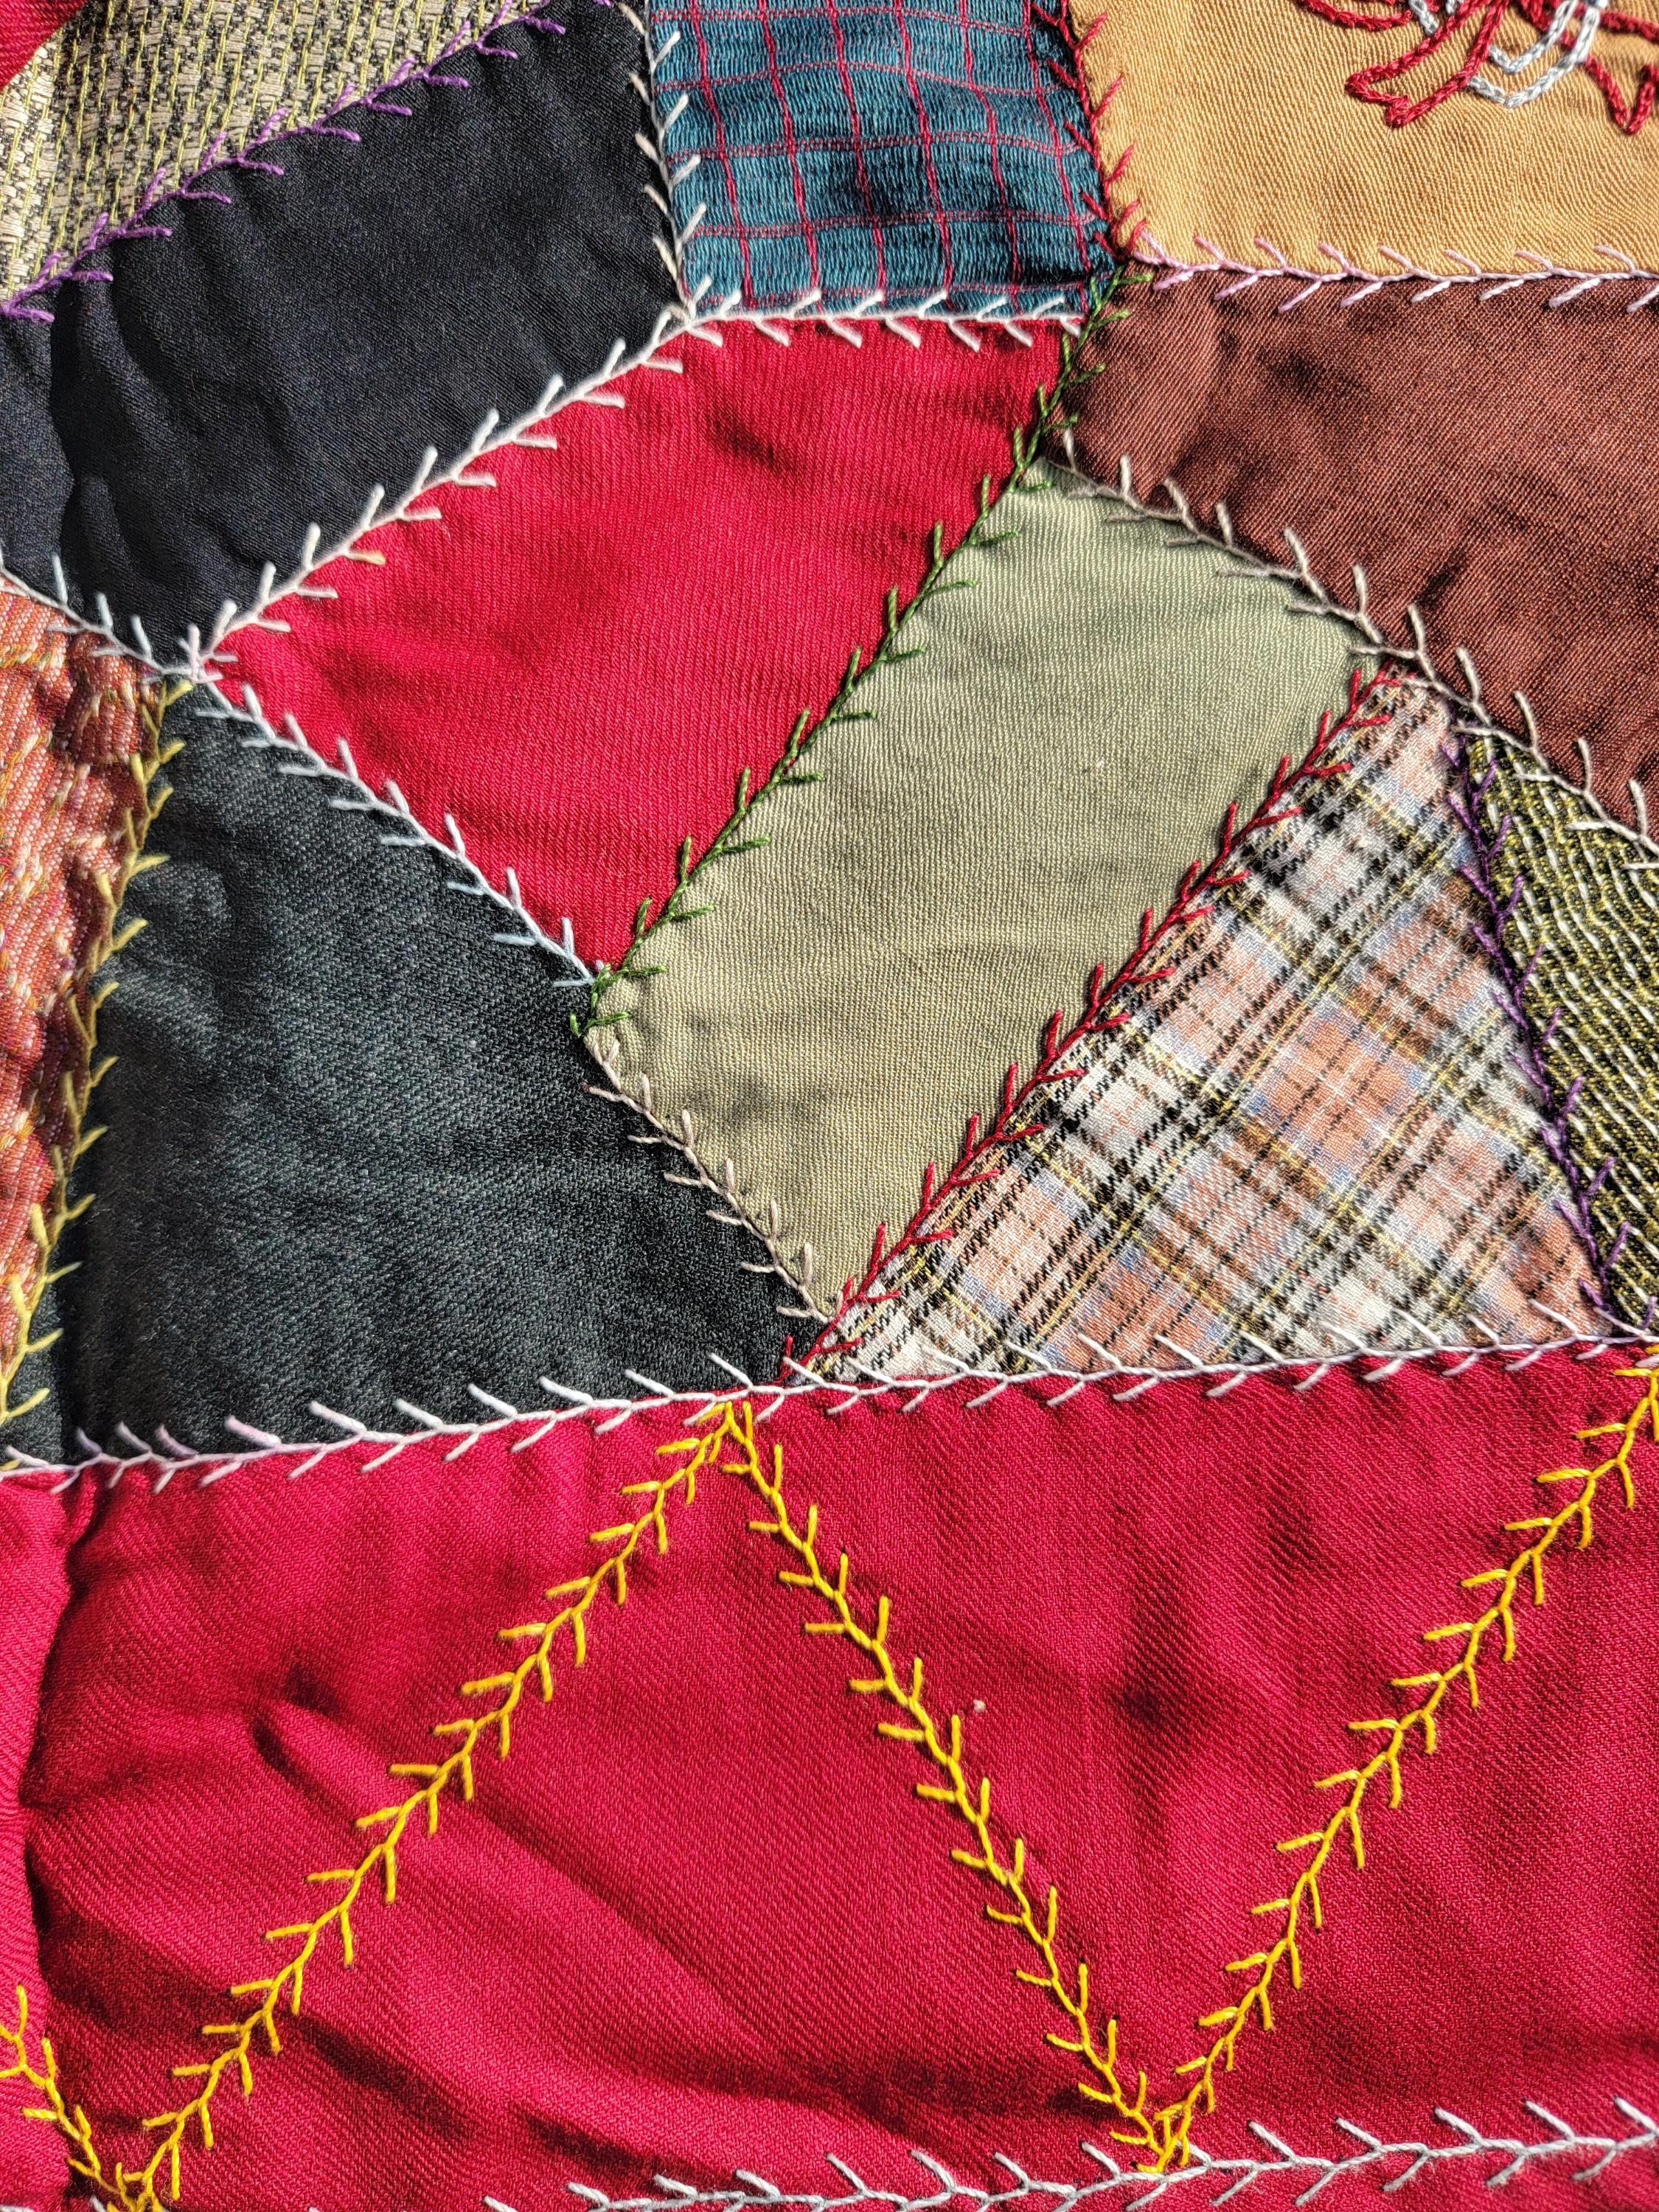 This amazing velvet & wool crazy quilt is in pristine condition and is signed & dated 1899. 